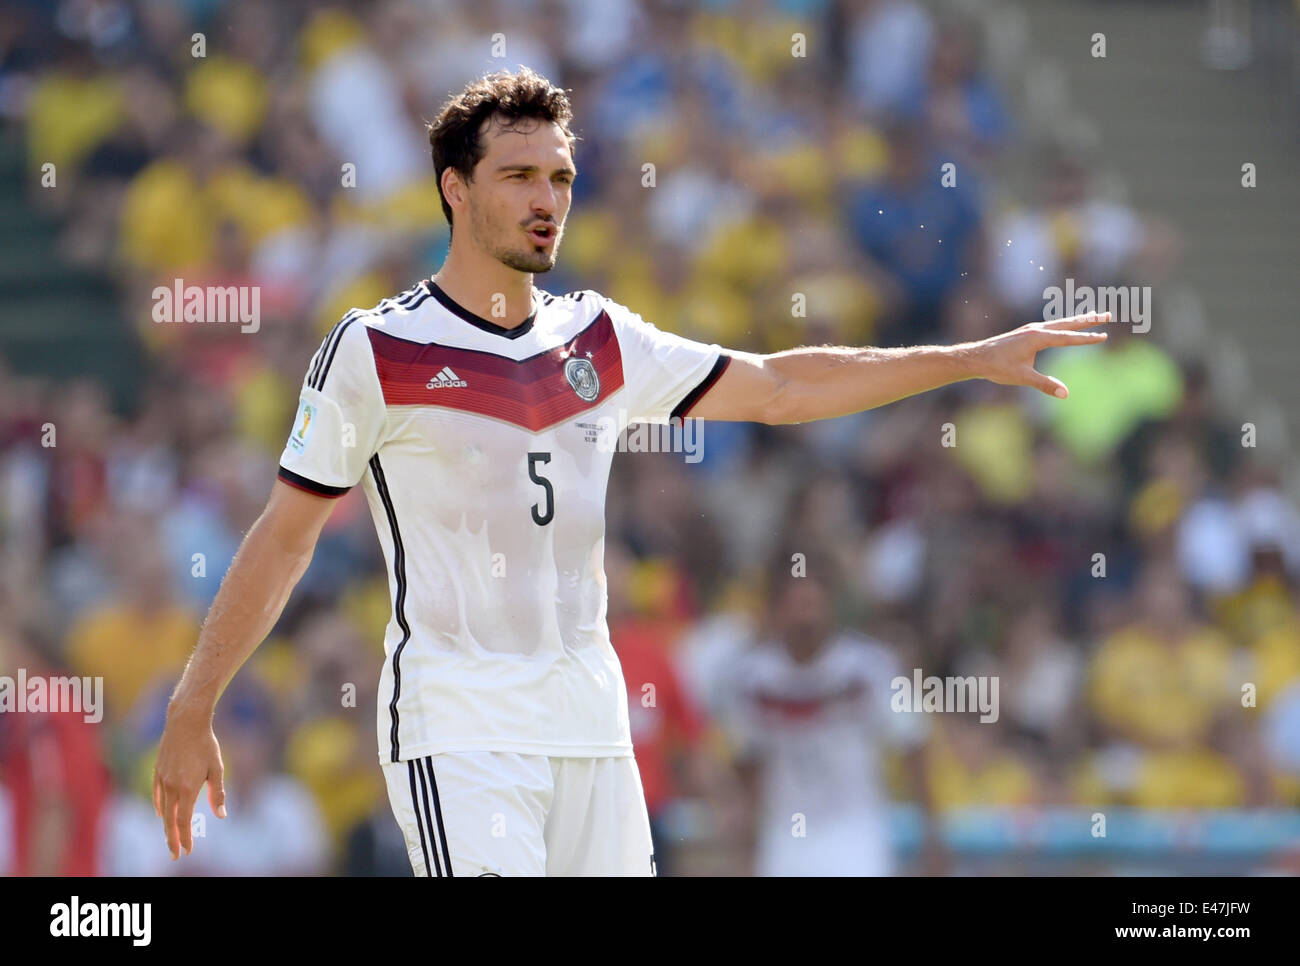 Rio de Janeiro, Brazil. 04th July, 2014. Mats Hummels of Germany reacts during the FIFA World Cup 2014 quarter final soccer match between France and Germany at Estadio do Maracana in Rio de Janeiro, Brazil, 04 July 2014. Photo: Andreas Gebert/dpa/Alamy Live News Stock Photo